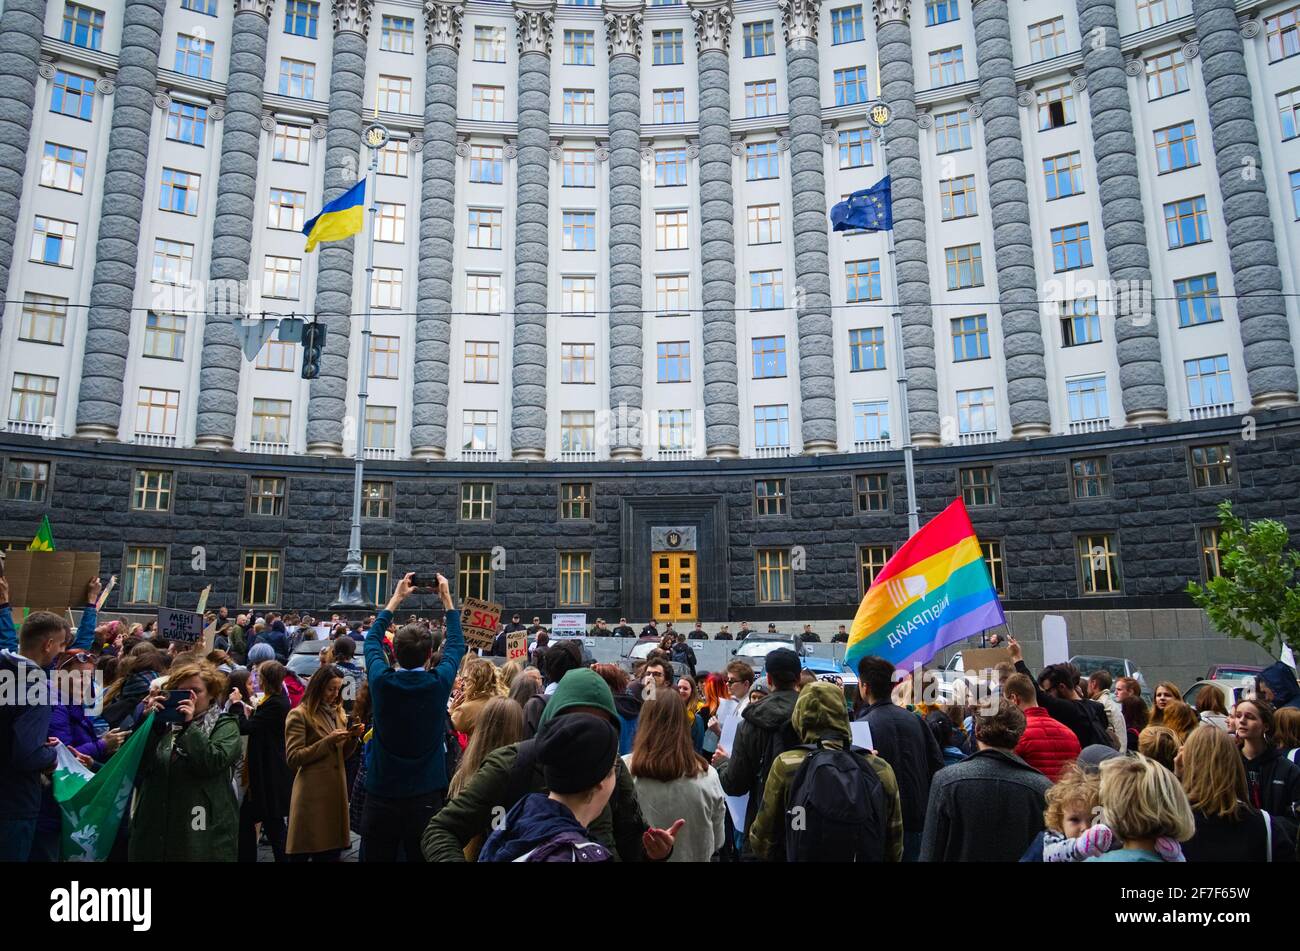 Kyiv, Ukraine - September 20, 2019: Ukrainian people gather climate change protest on Global Climate Strike day and demand on politics action on clima Stock Photo